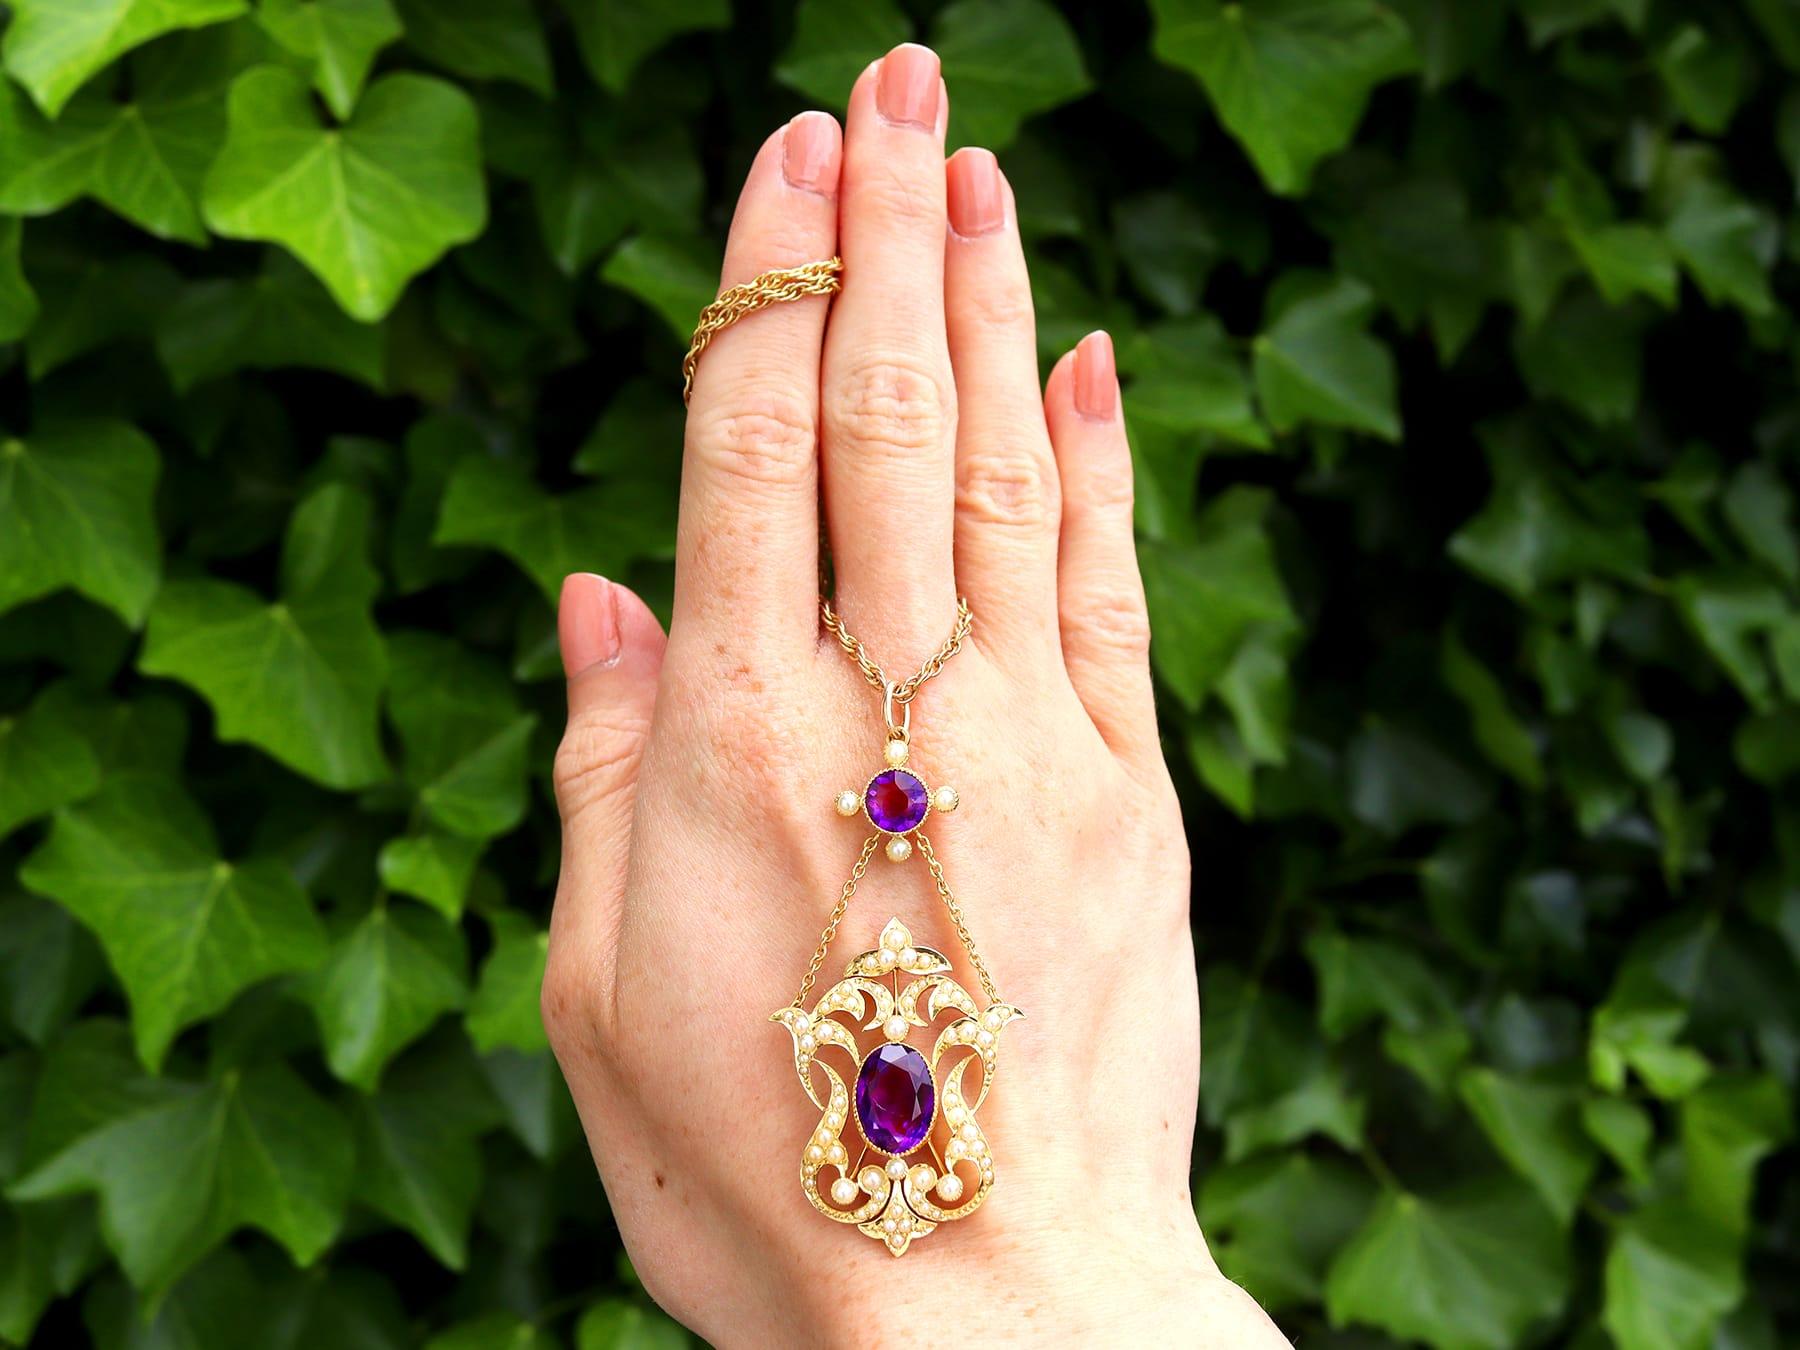 An impressive antique 4.83 carat amethyst and seed pearl, 18 karat yellow gold pendant and 9 karat yellow gold chain; part of our diverse antique jewelry and estate jewelry collections.

This stunning, fine and impressive Edwardian amethyst necklace